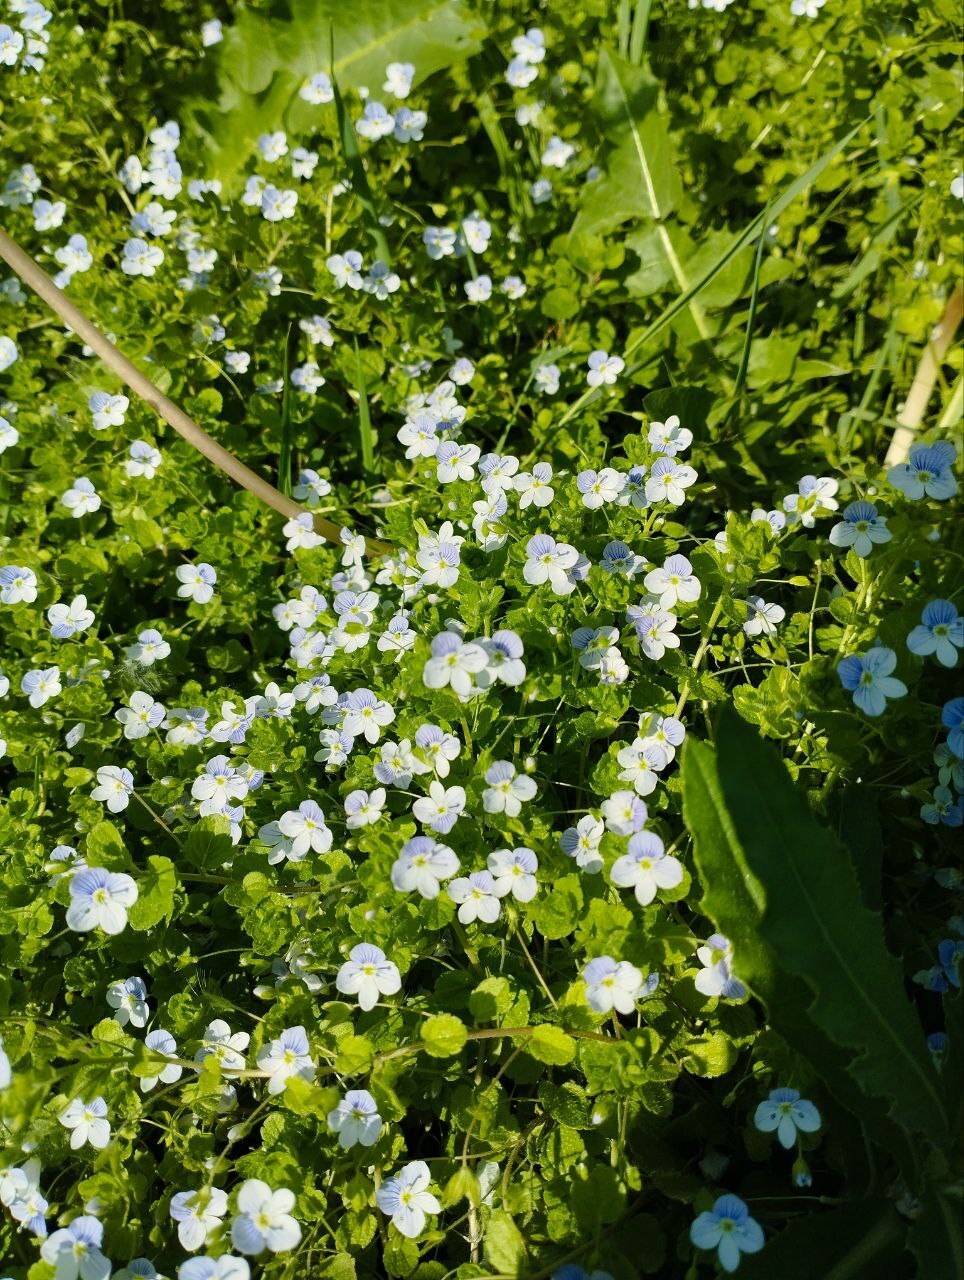 Very small flowers, less than a centimeter - Crossposting, Pikabu publish bot